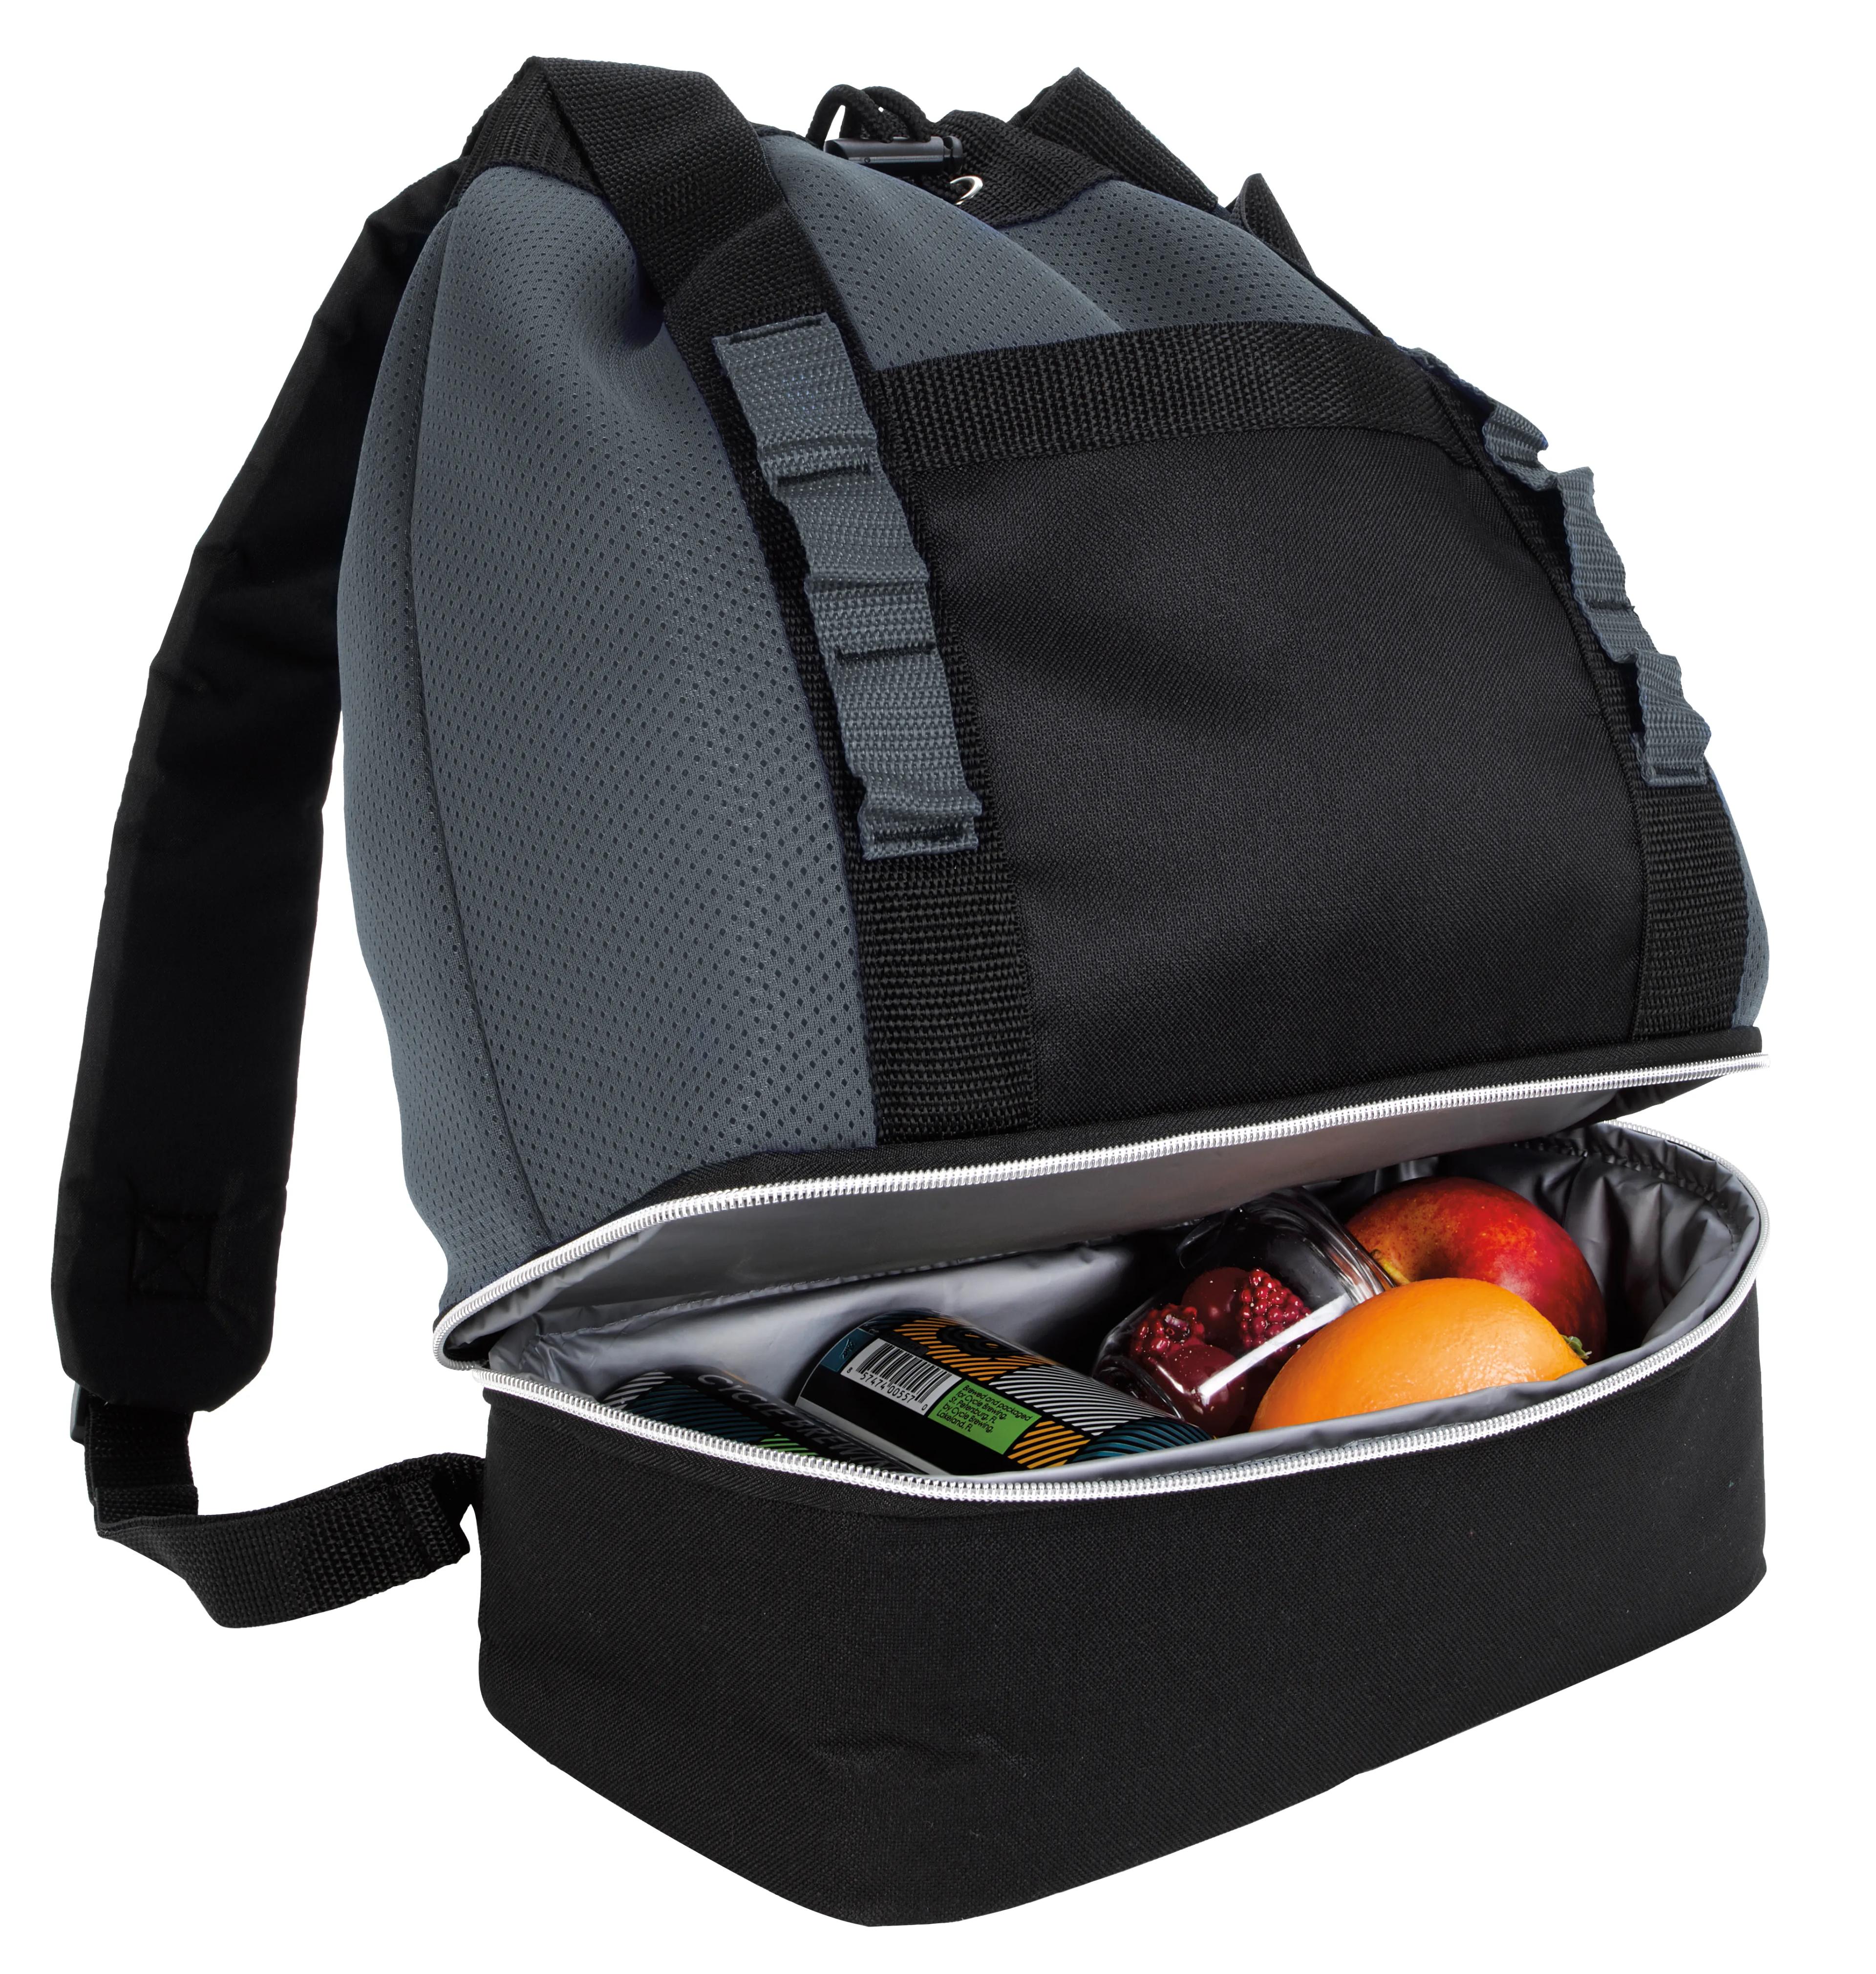 Brightwater Dual-Compartment Tote-Pack Cooler 22 of 43